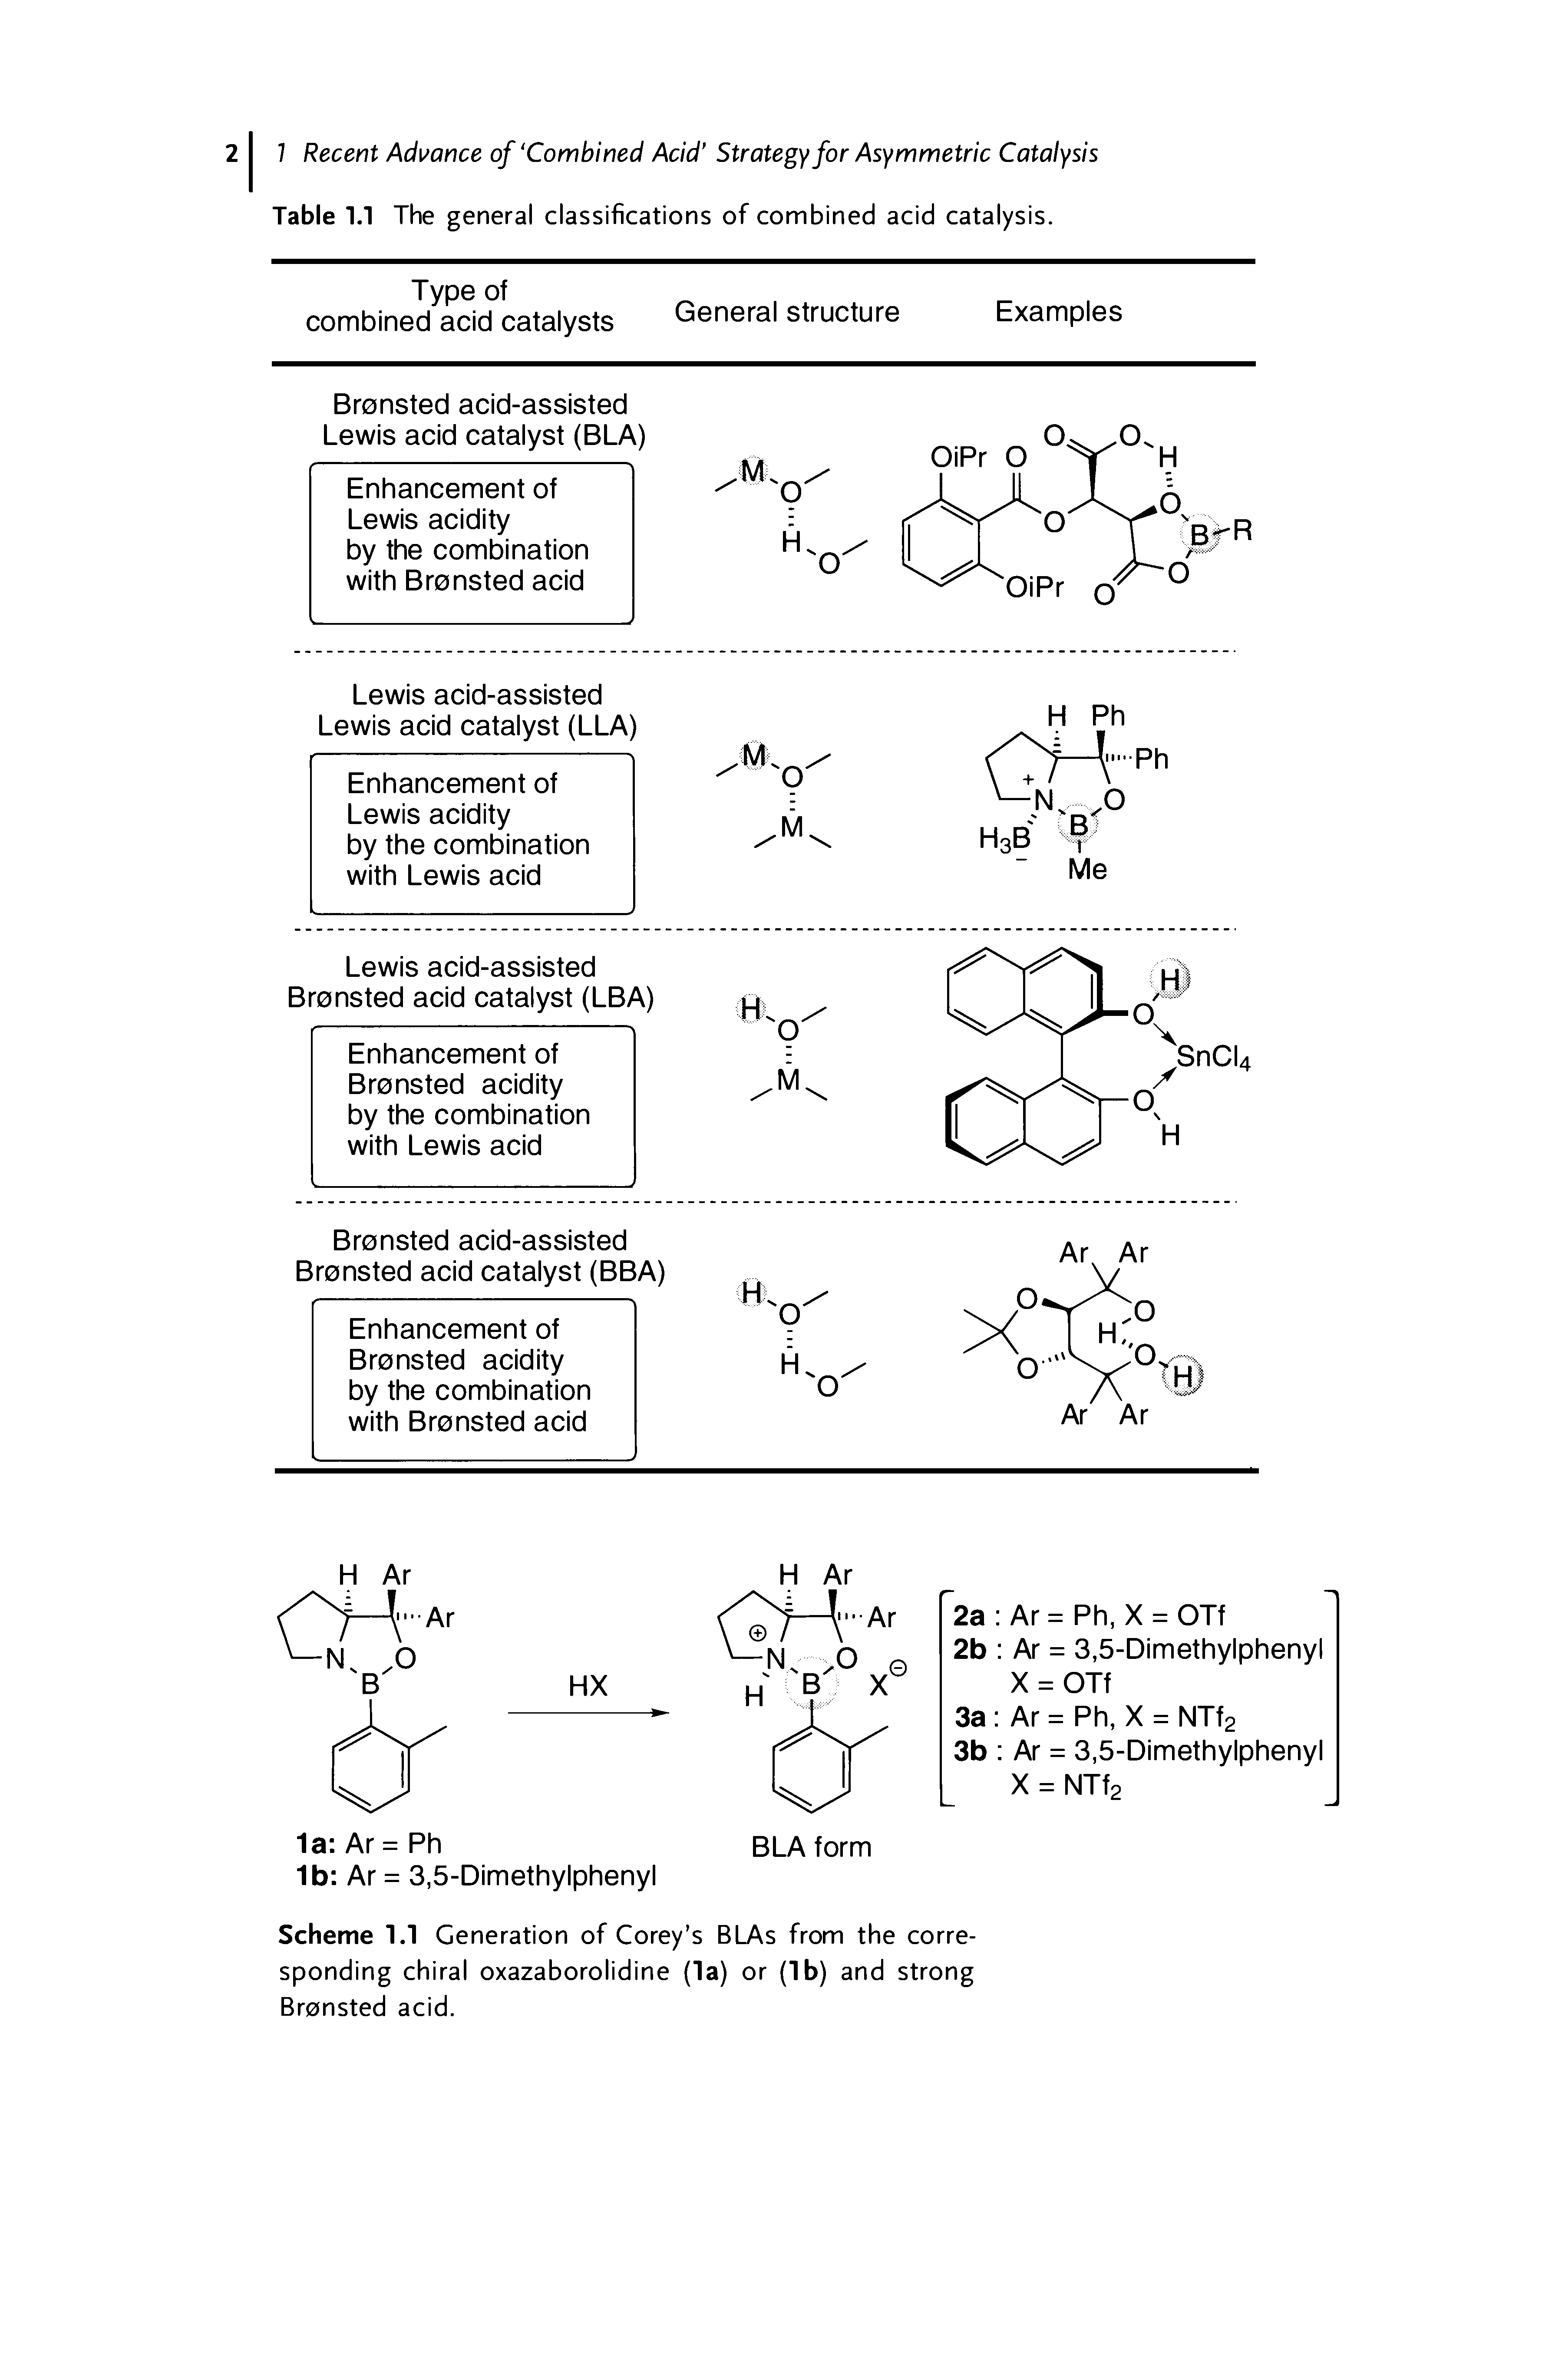 Scheme 1.1 Generation of Corey s BLAs from the corresponding chiral oxazaborolidine (la) or (lb) and strong Bronsted acid.